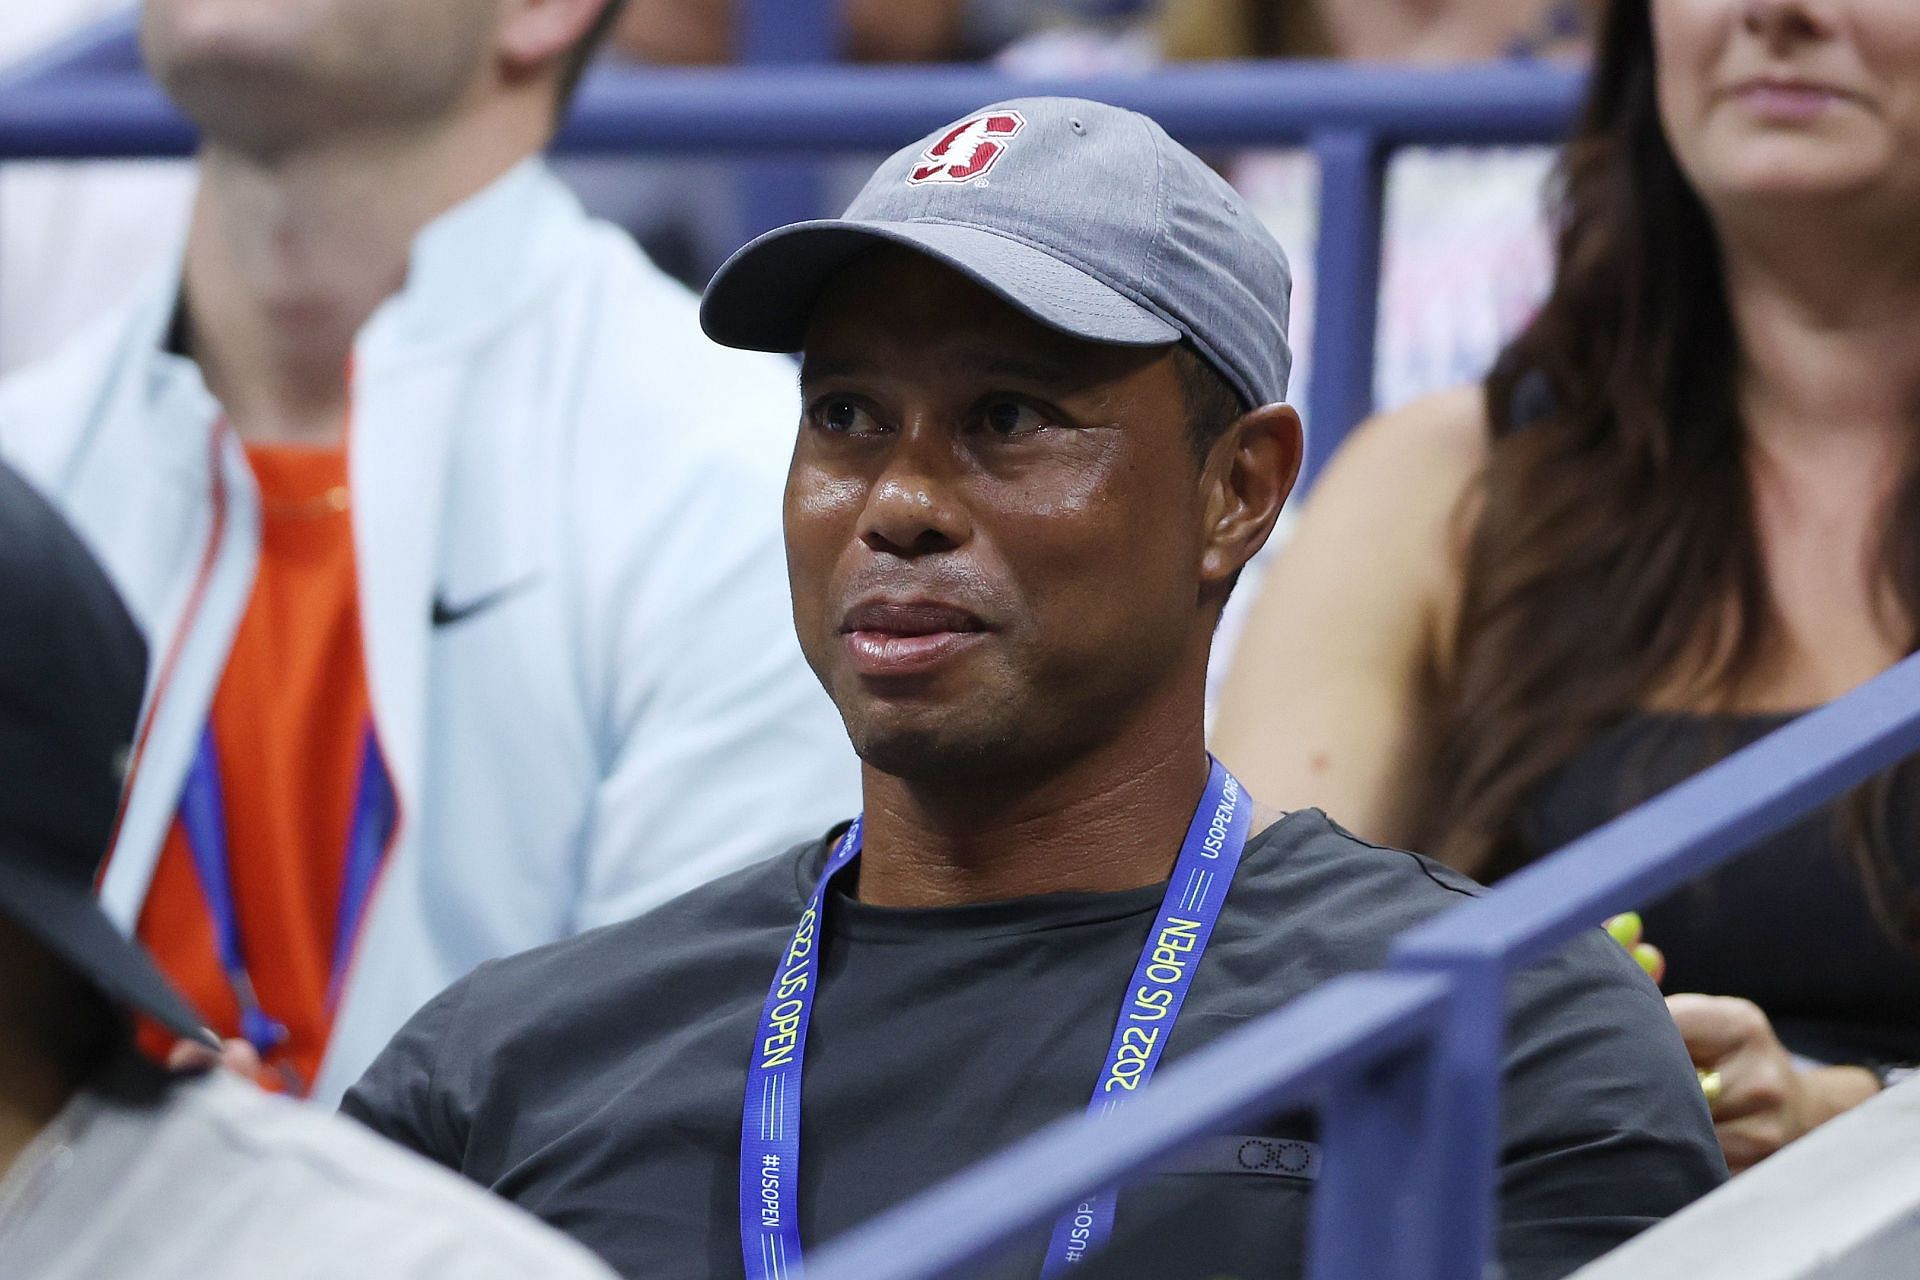 Tiger Woods at the Serena Williams vs Anett Kontaveit match during the 2022 US Open